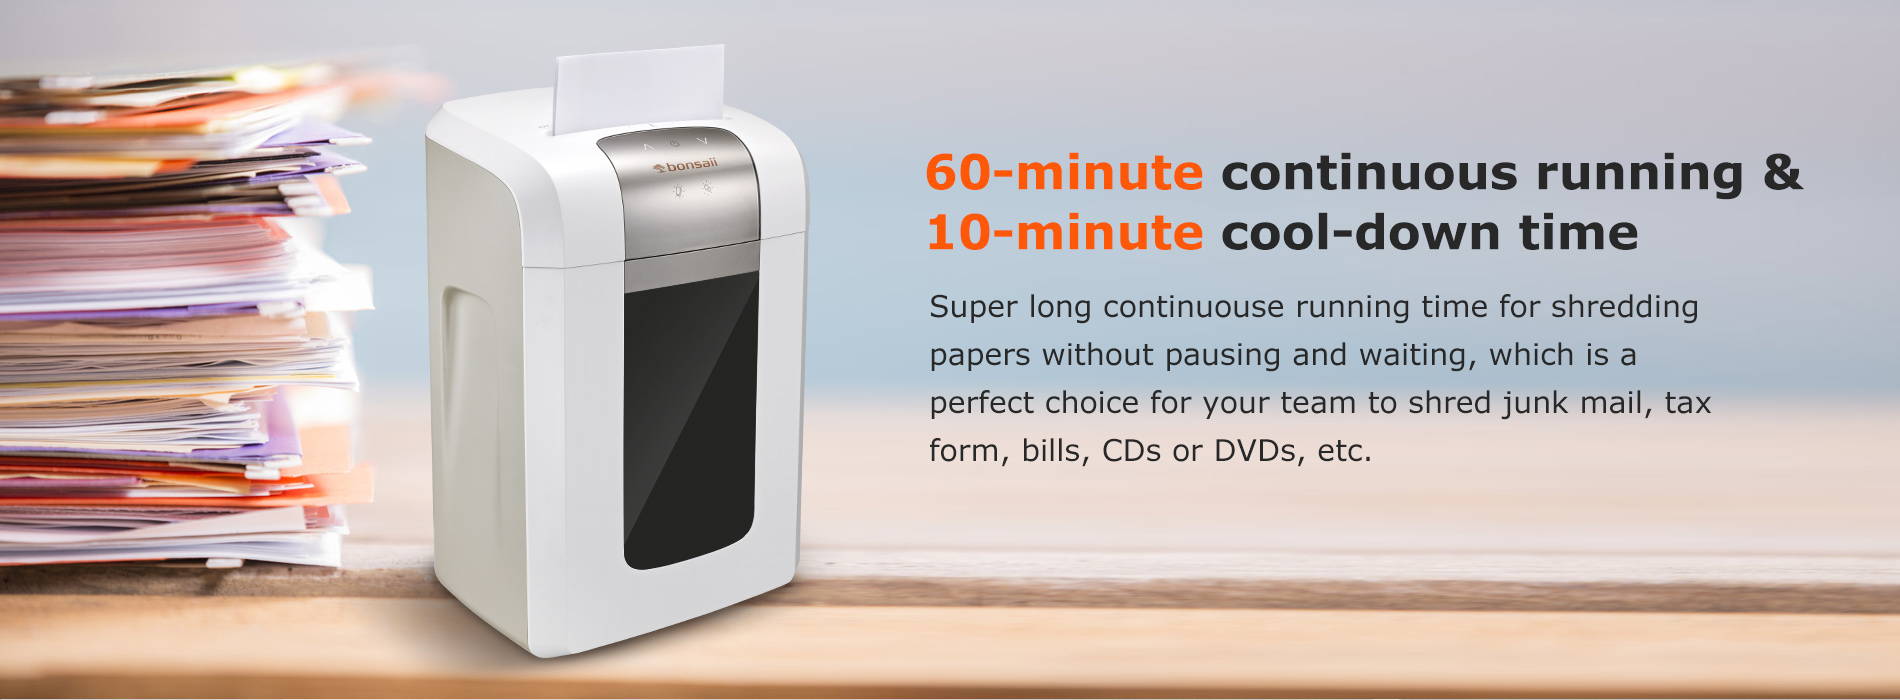 60-minute continuous running & 10-minute cool-down time  Super long continuouse running time for shredding papers without pausing and waiting, which is a perfect choice for your team to shred junk mail, tax form, bills, CDs or DVDs, etc.